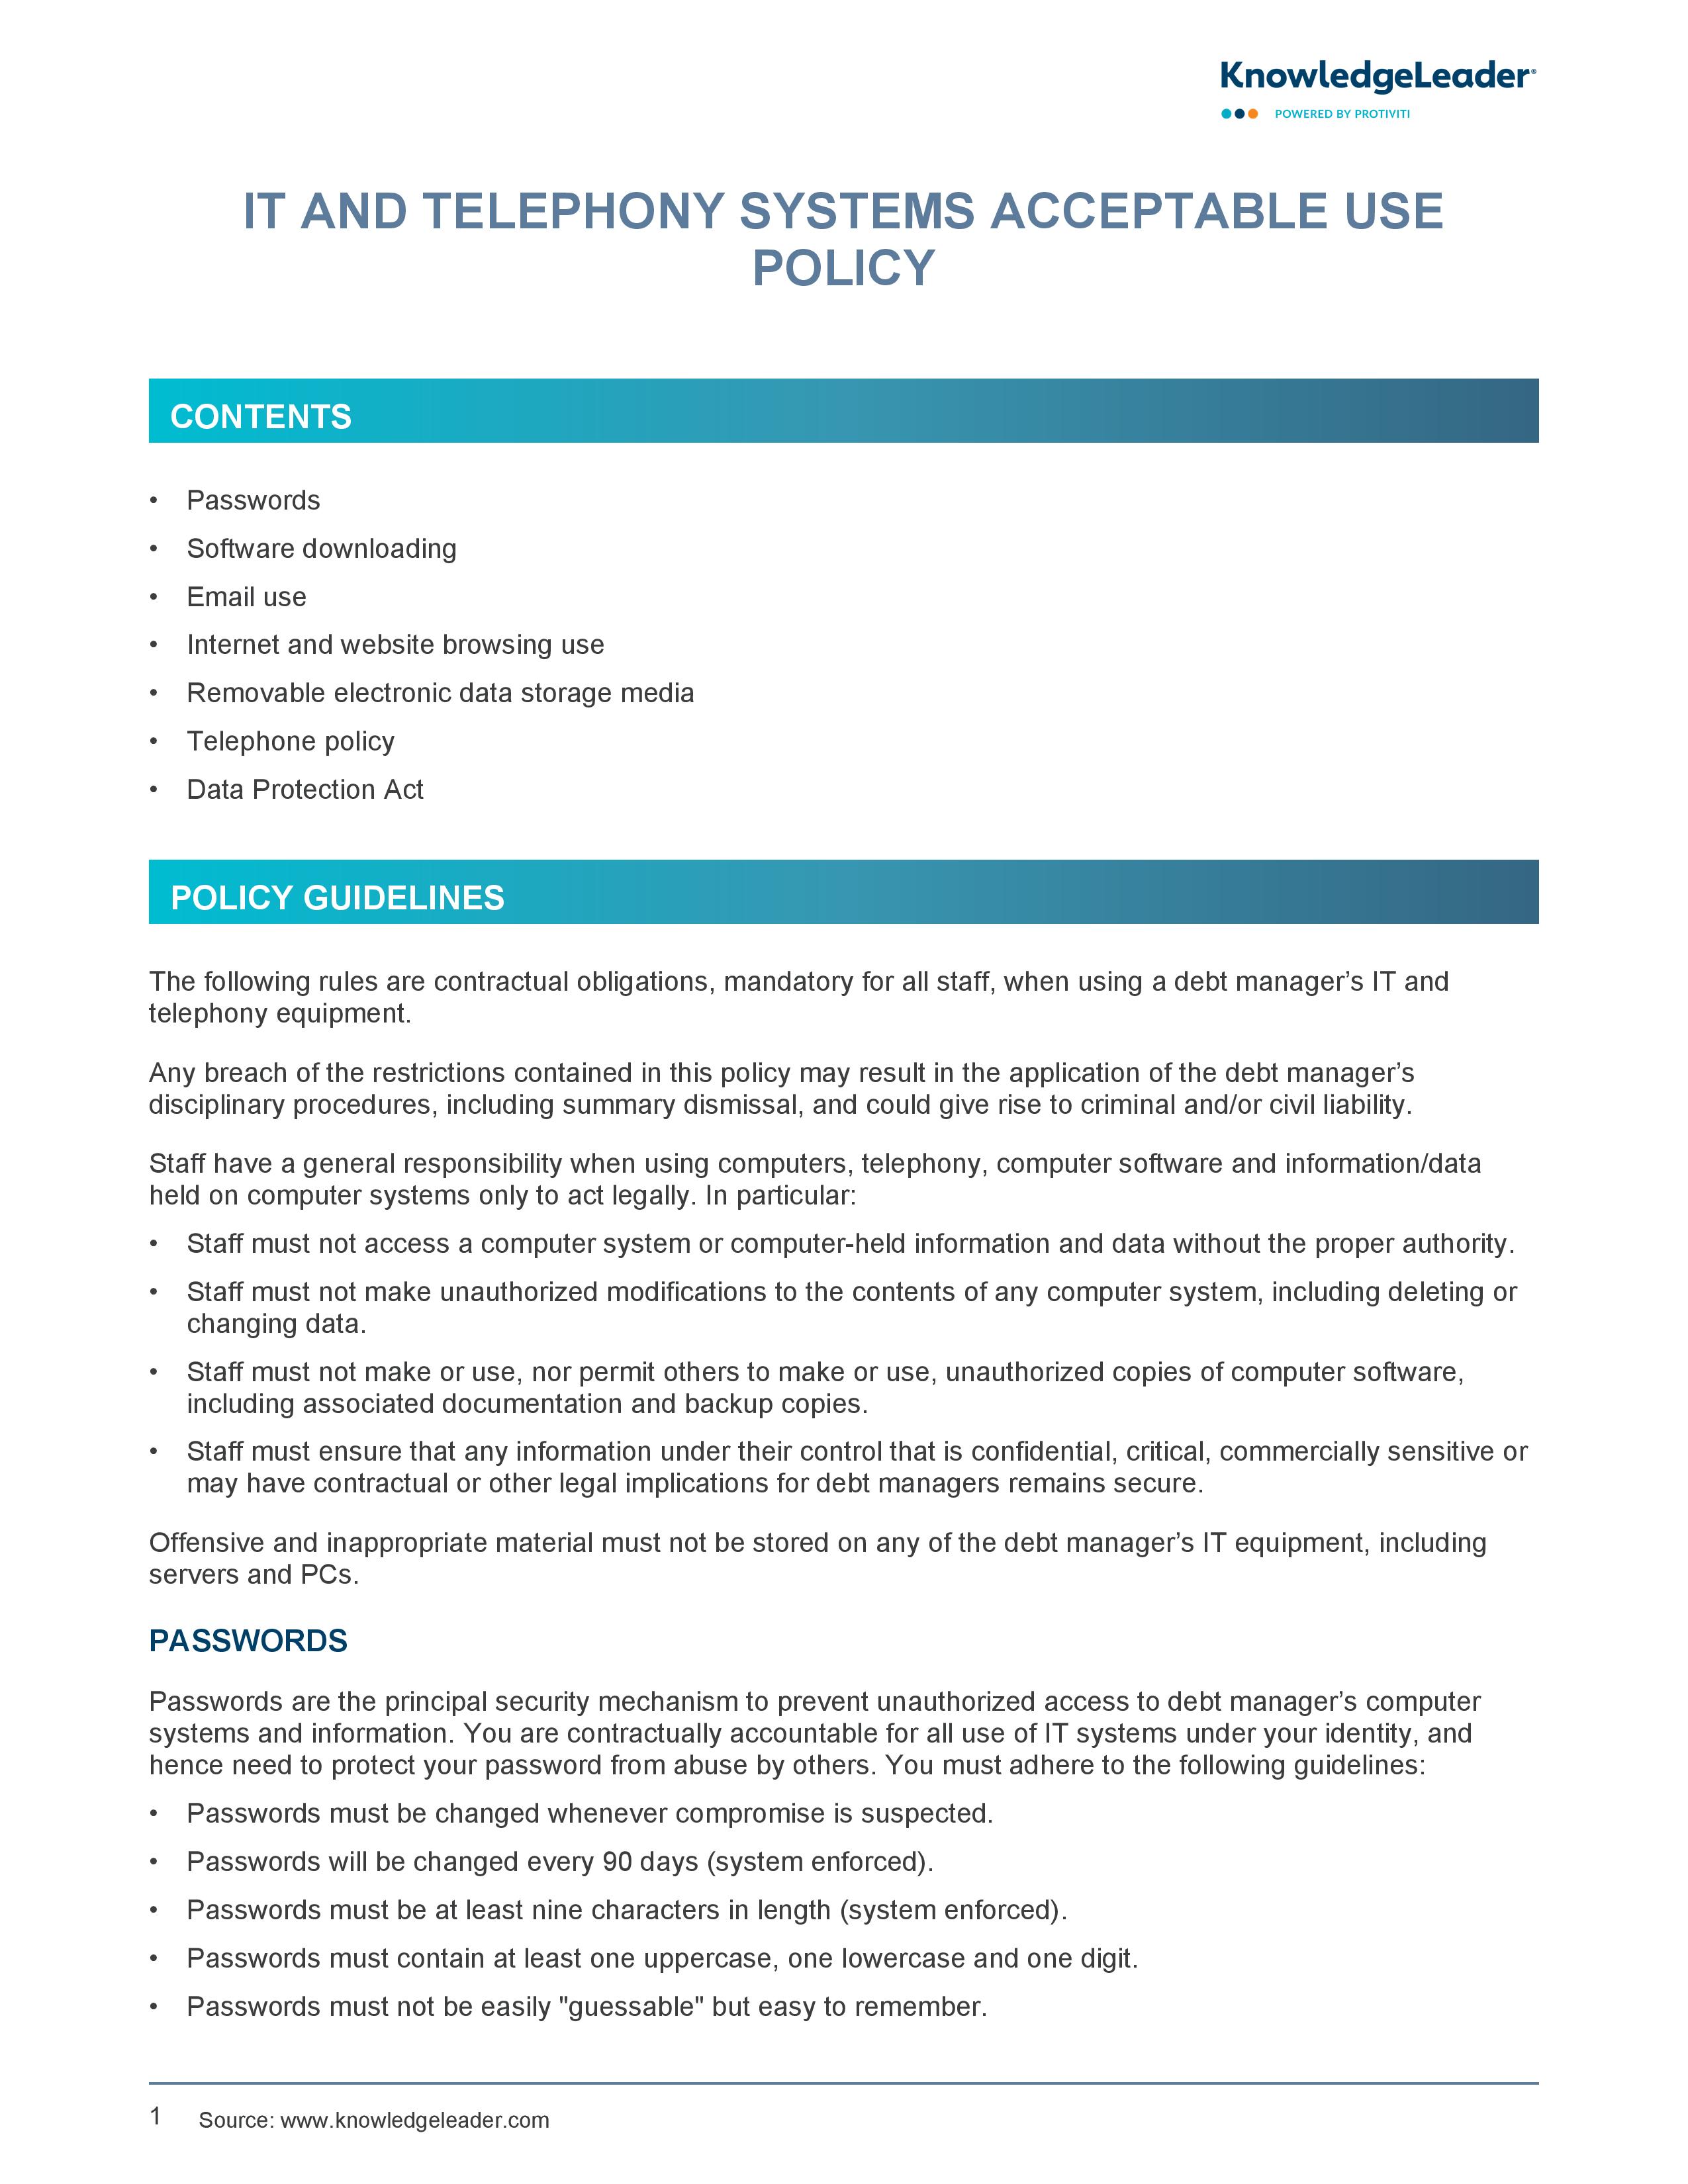 Screenshot of the first page of IT and Telephony Acceptable Use Policy